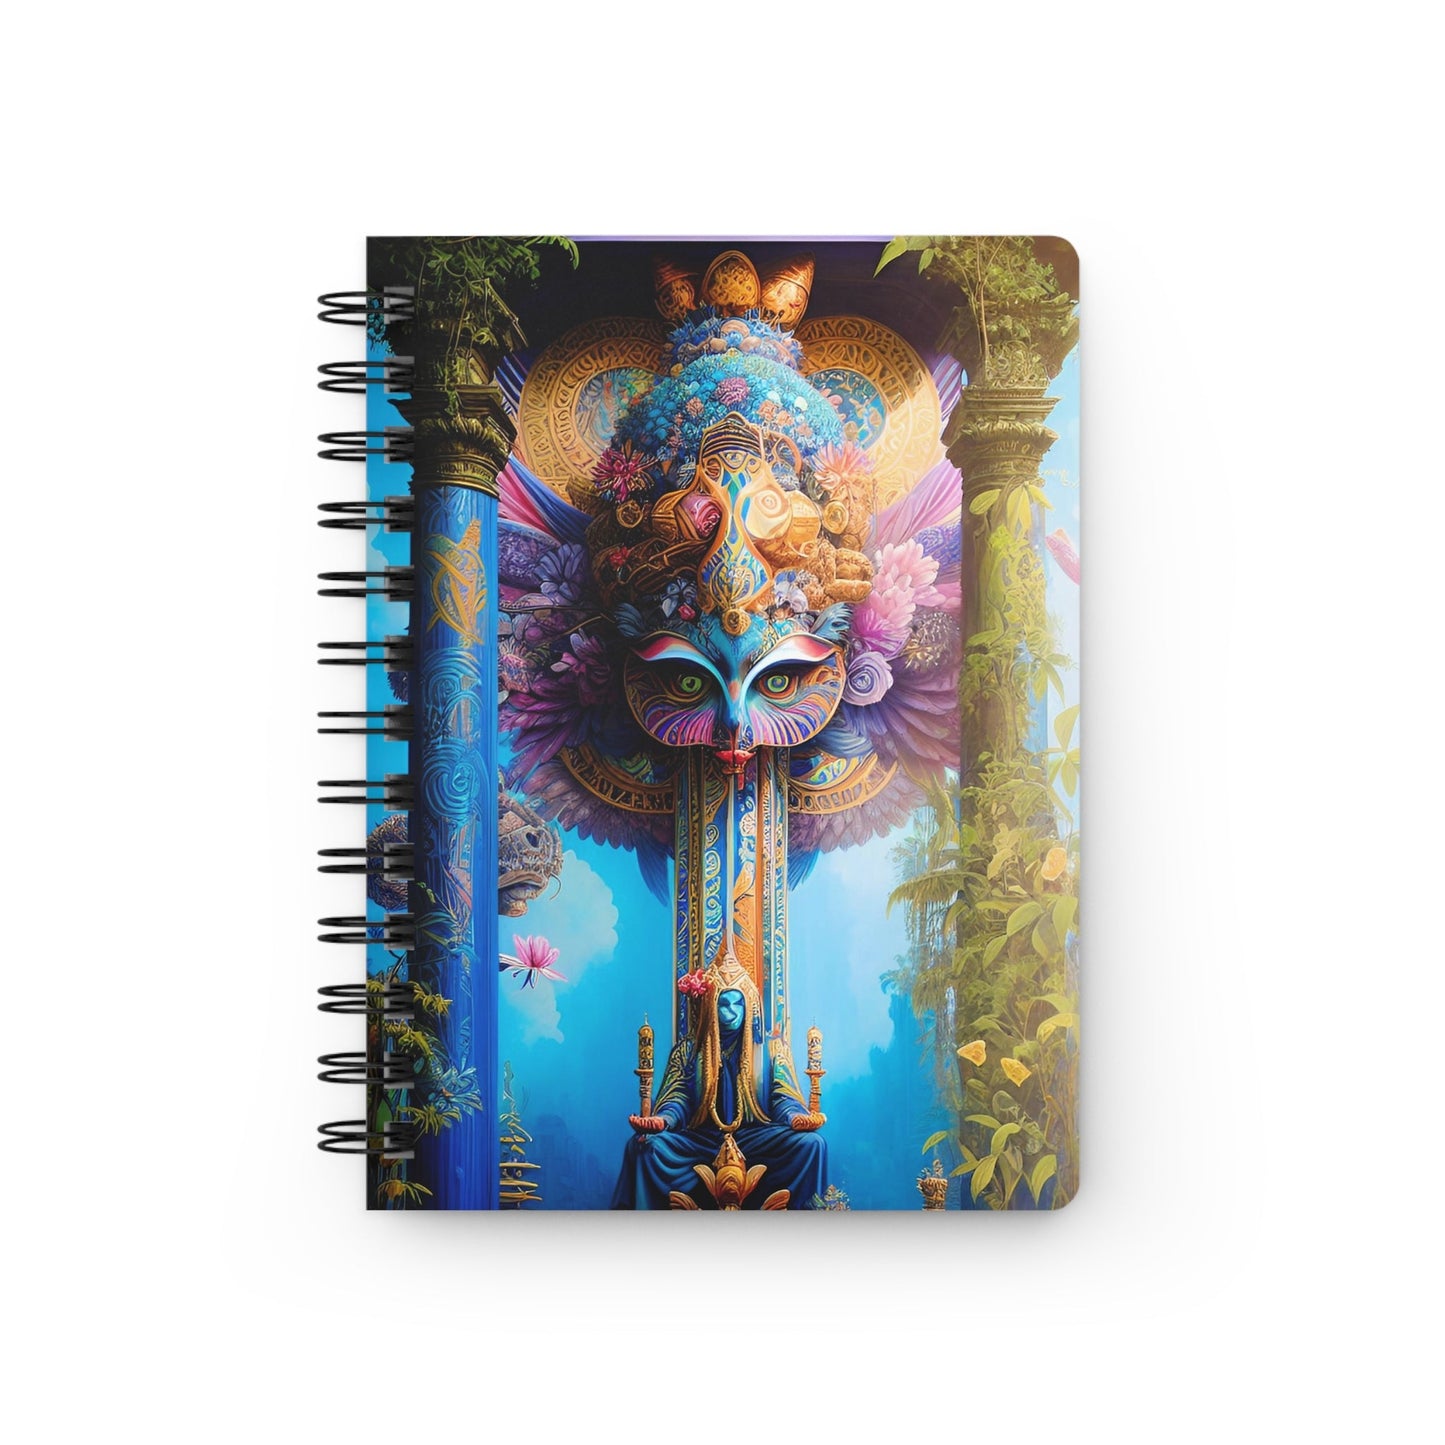 CrazyYetiClothing, CYC, The Mask (Spiral Bound Journal), Paper products